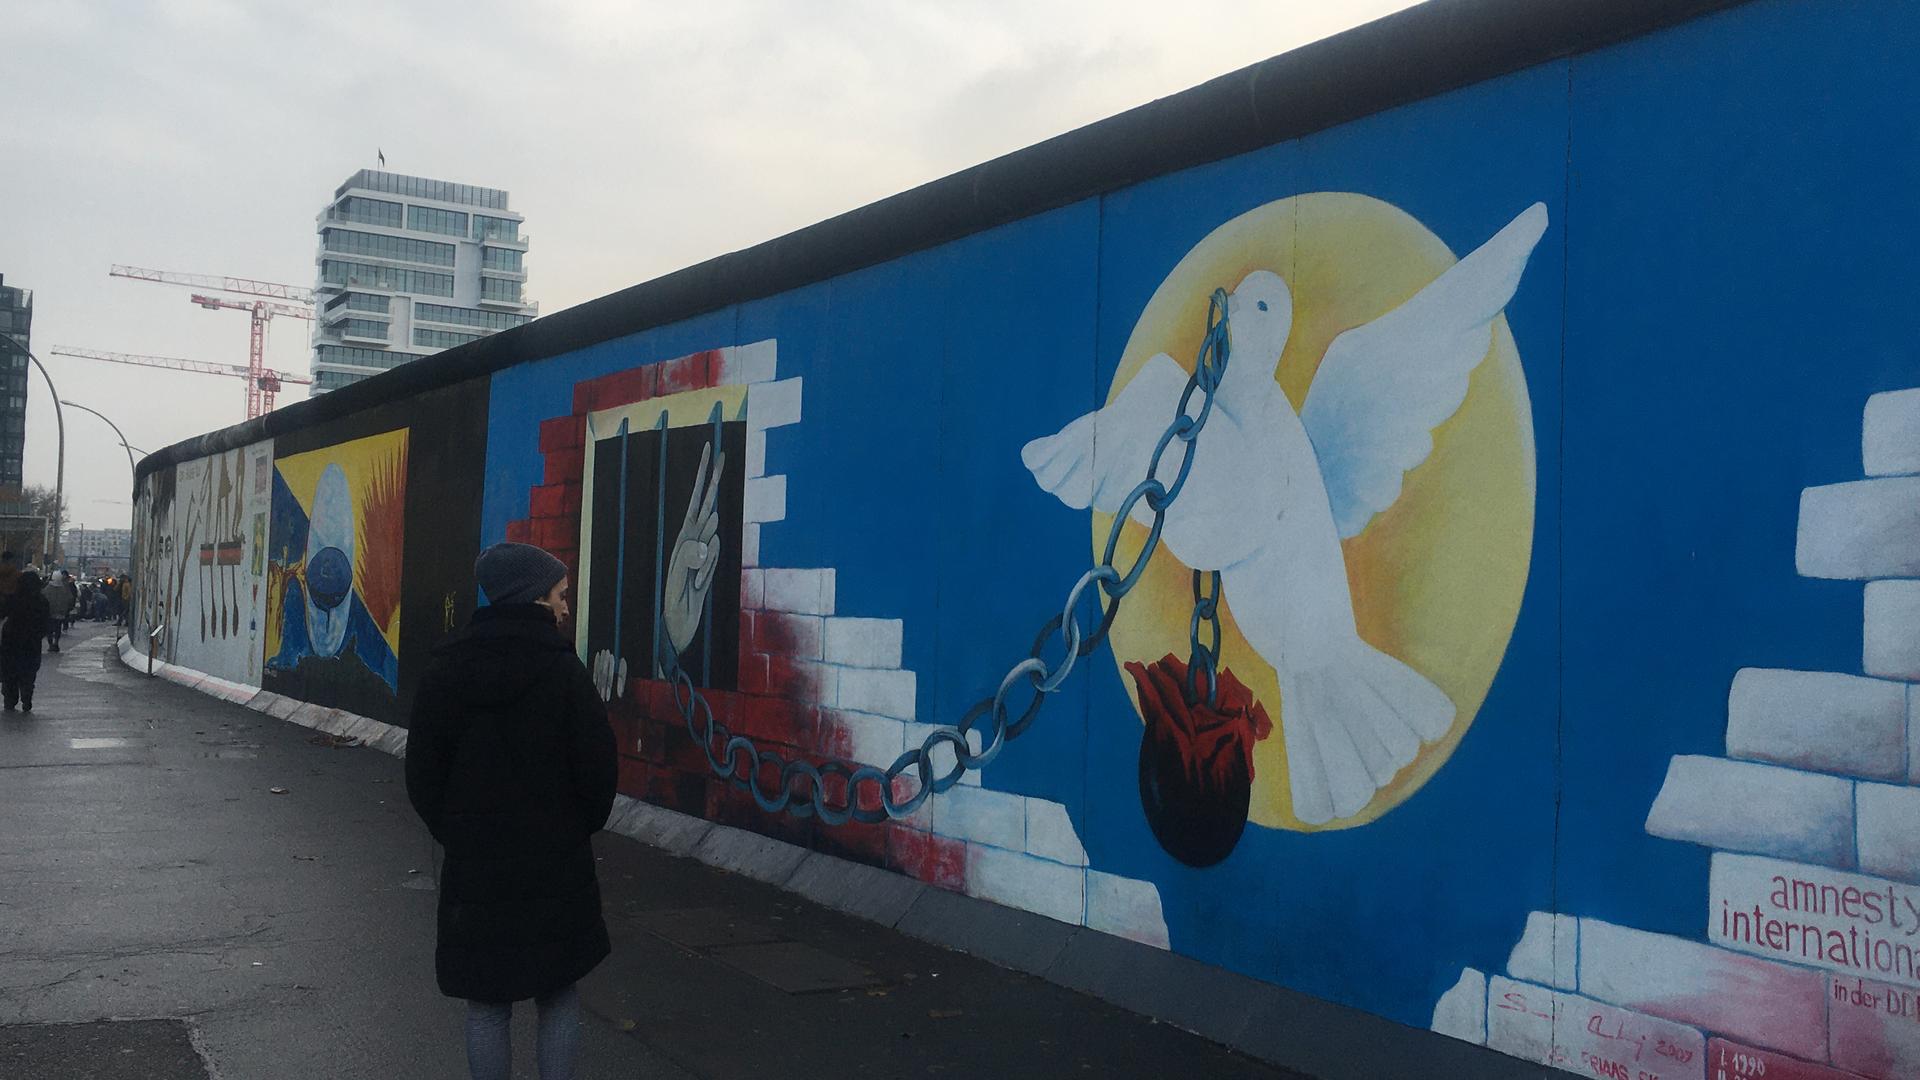 A mural of a white bird, chain and rose painted on the Berlin wall and a person walking by it